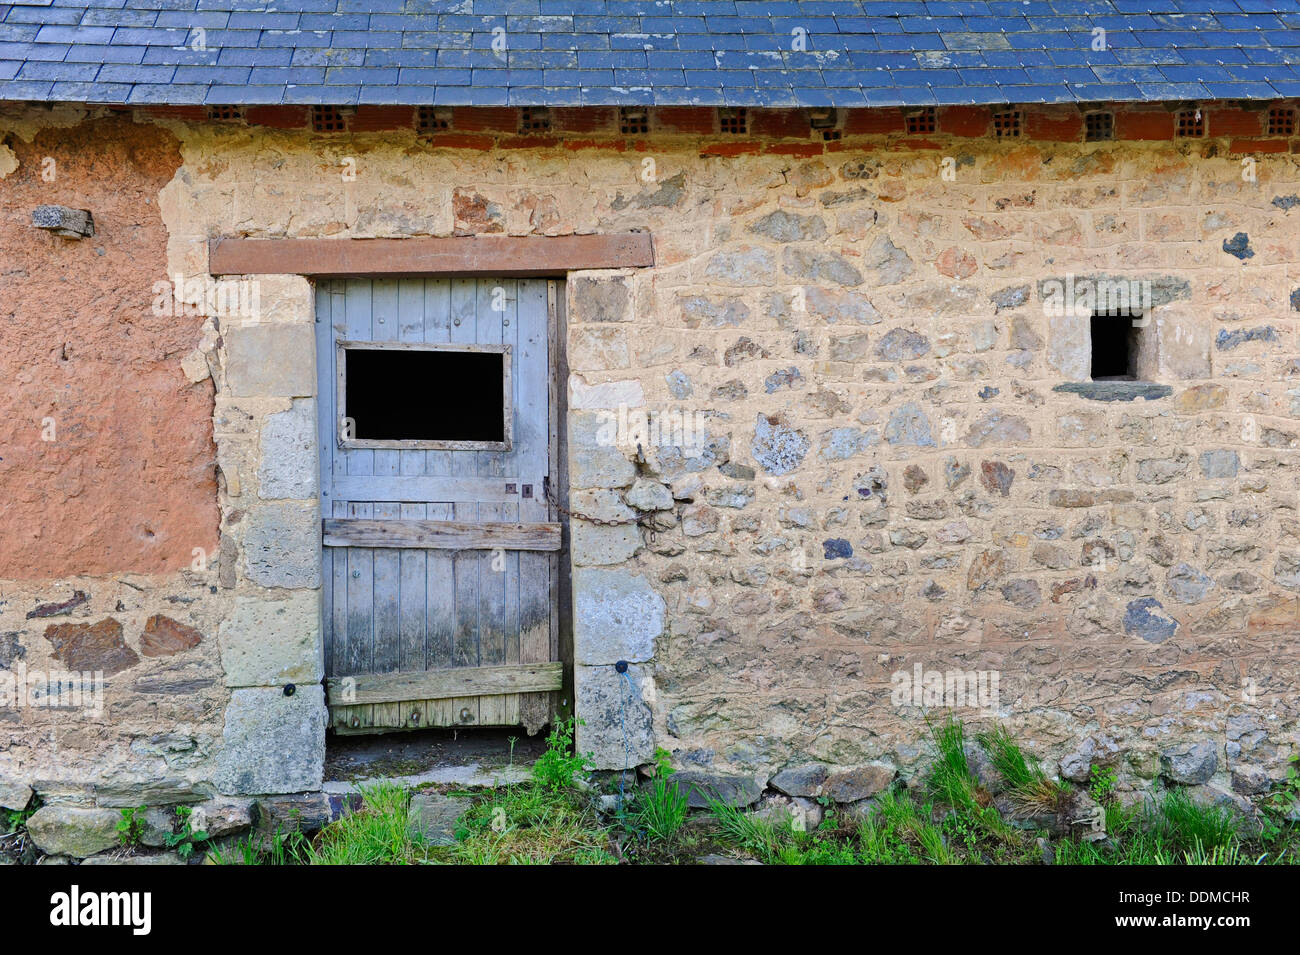 Traditional French farm buildings made from a mixture of red mud, stone with wood timbered frames for windows and doors. Stock Photo